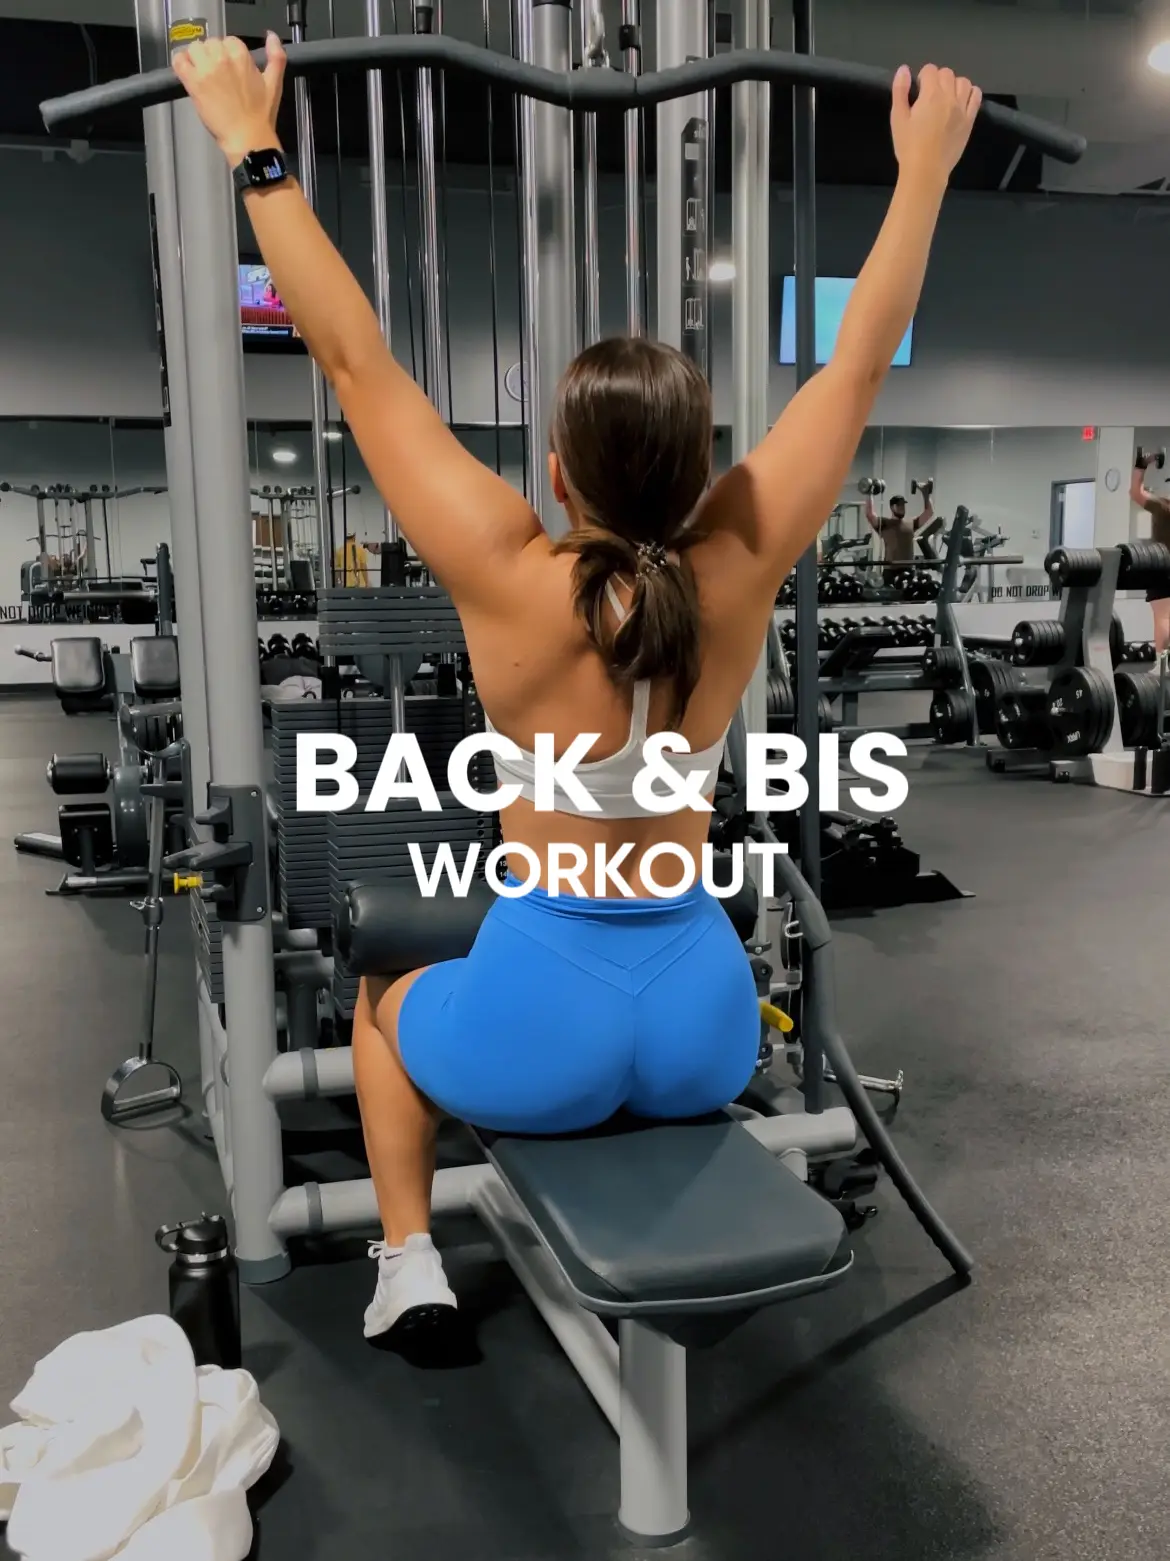 BACK & BIS WORKOUT🦋, Gallery posted by ganna sumar